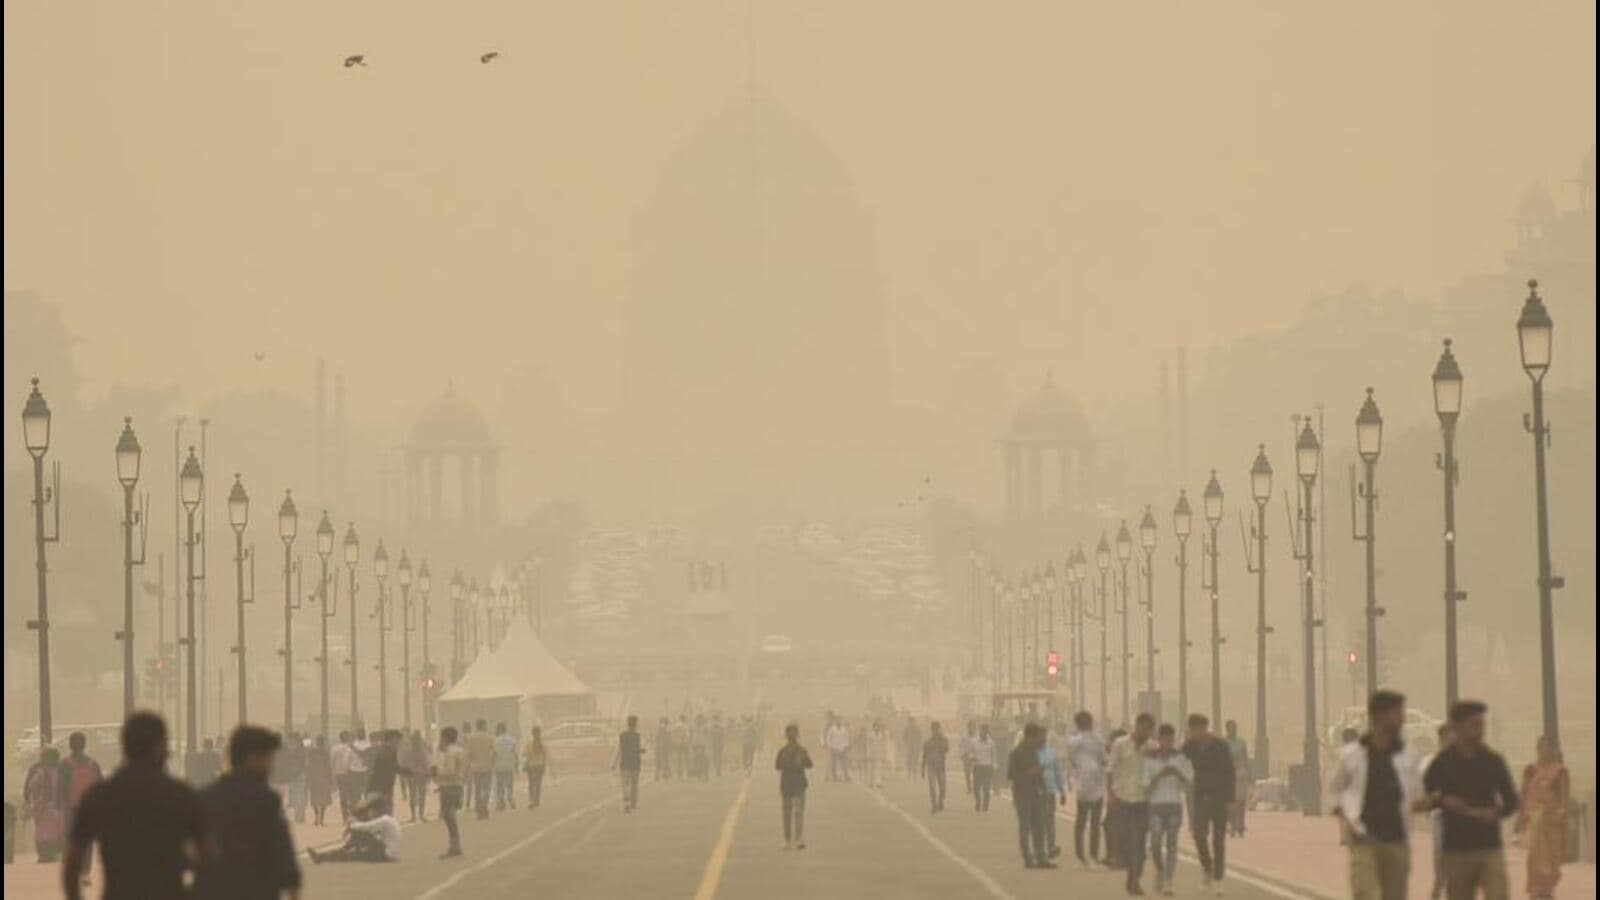 Delhis Pollution Levels Can Have Lasting Health Effects Latest News India Hindustan Times 9062